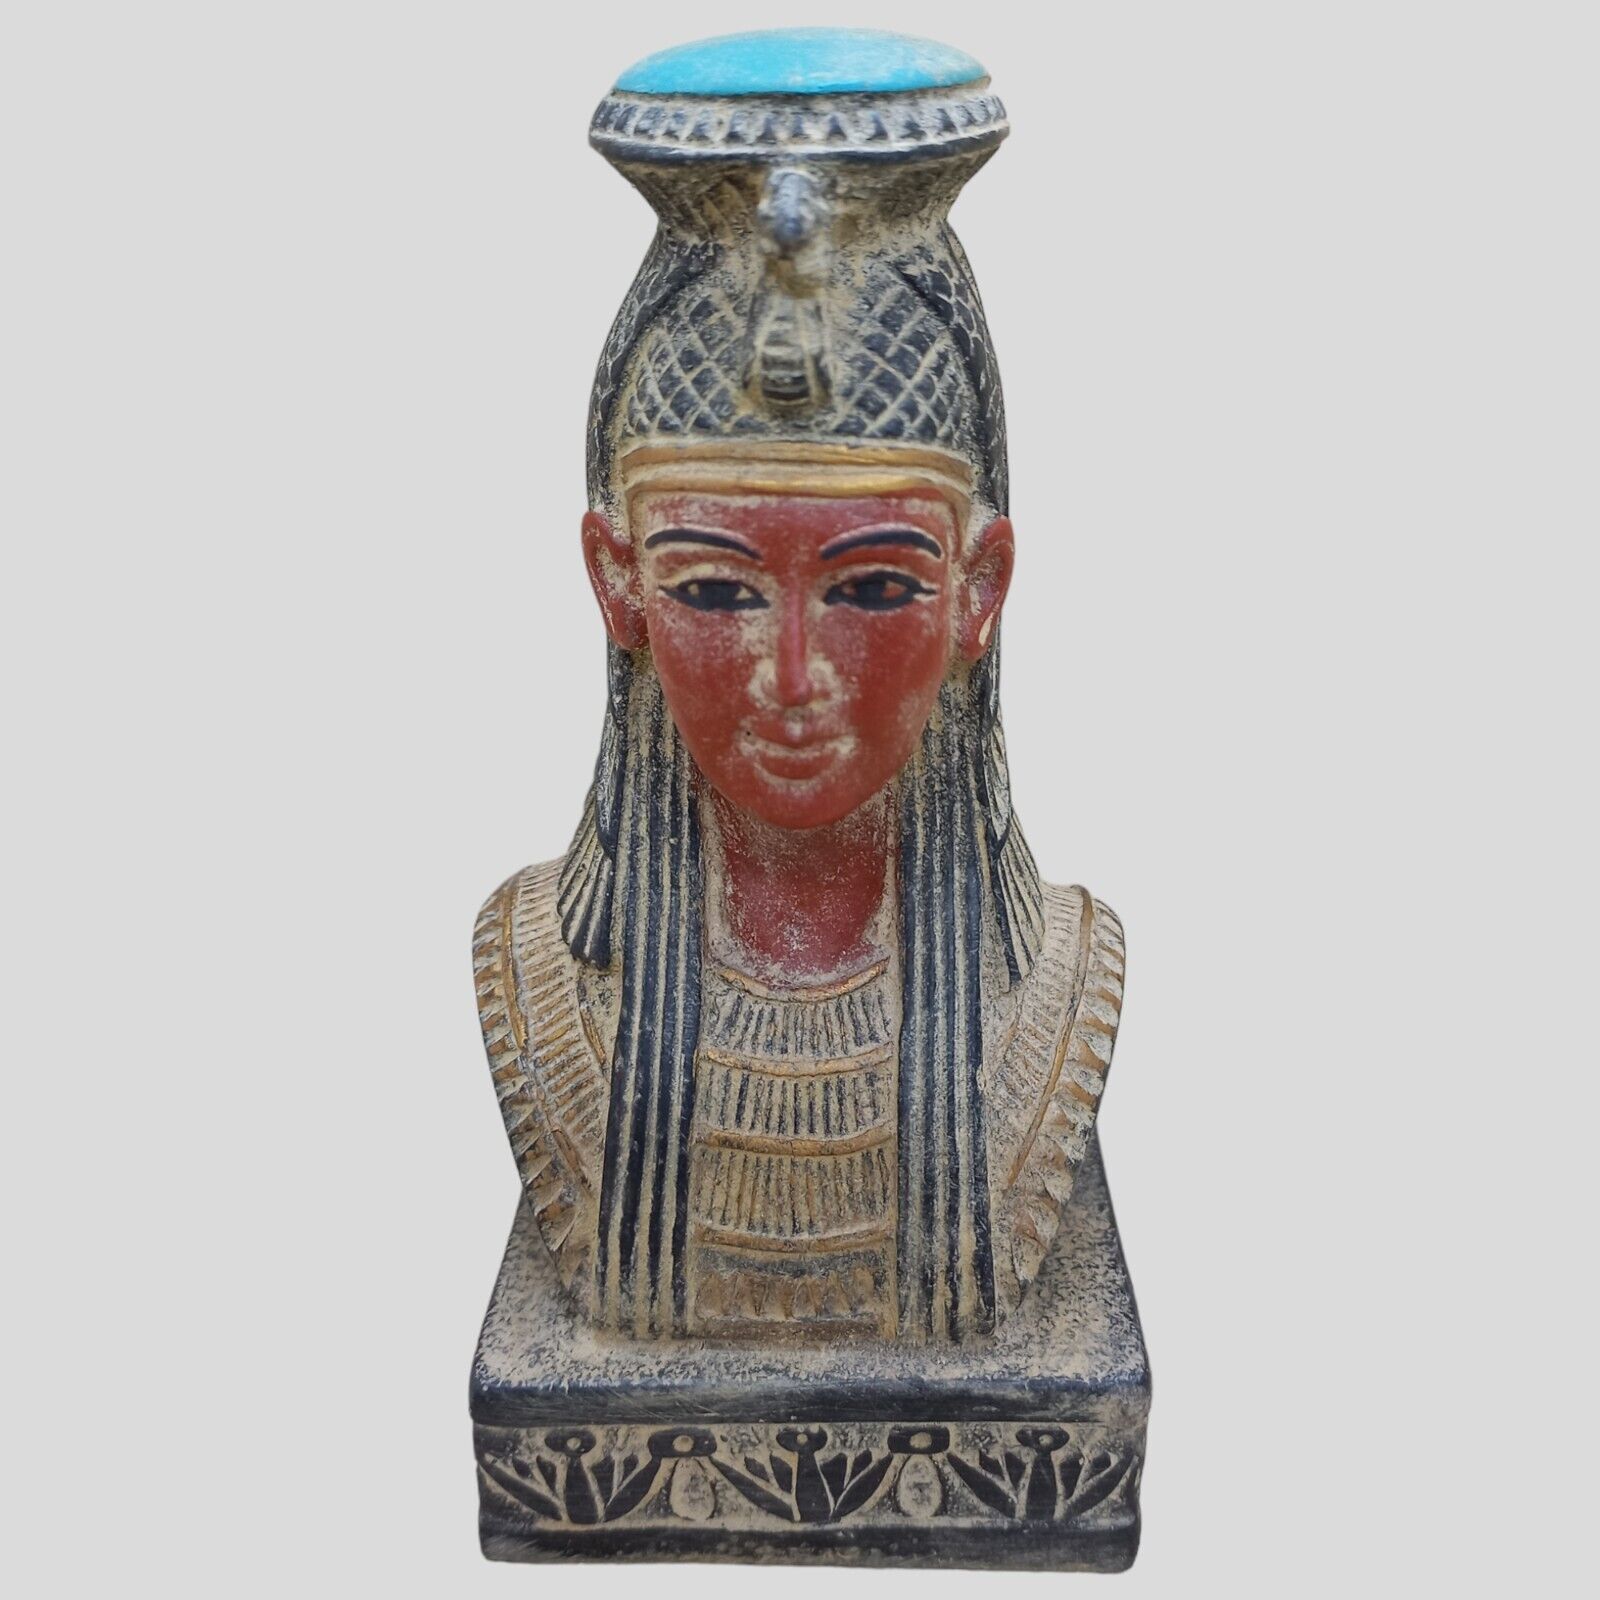 QUEEN CLEOPATRA STATUE FROM ANCIENT PHARAONIC EGYPT HISTORY ANTIQUITIES BC